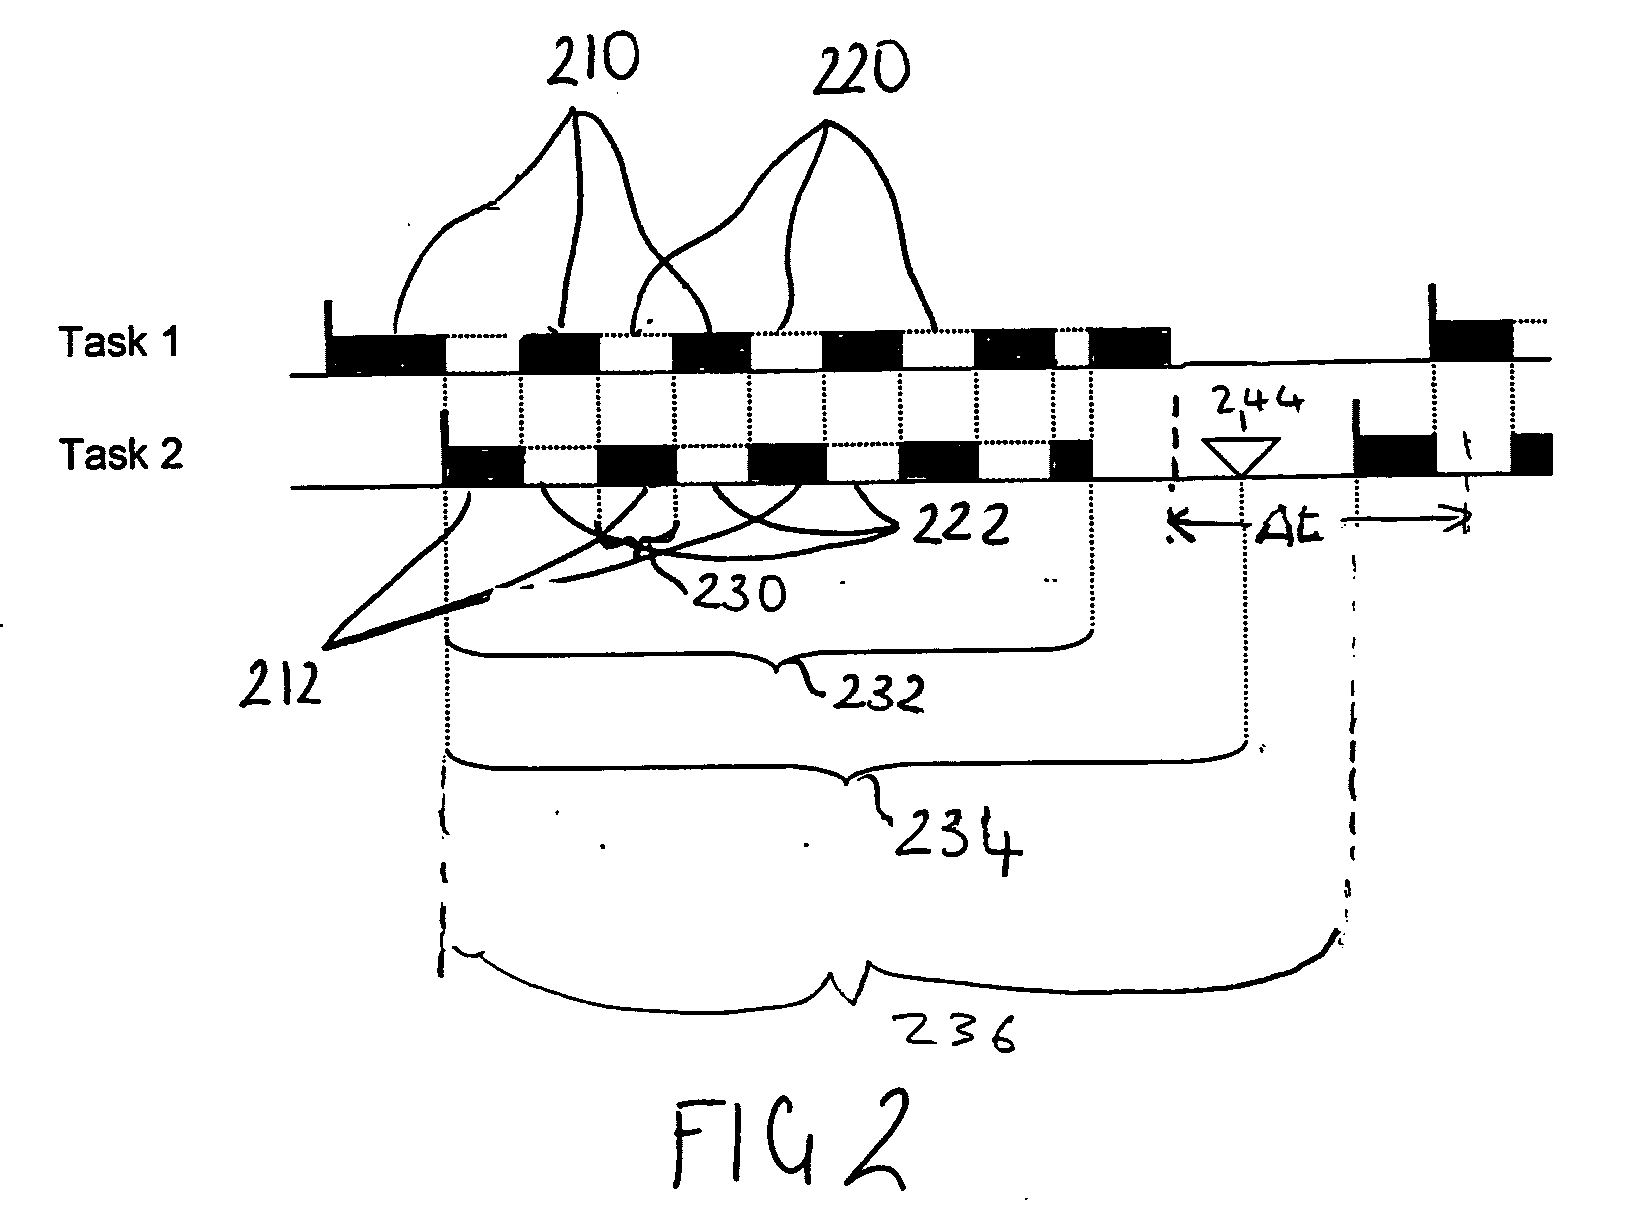 Performance level setting in a data processing system